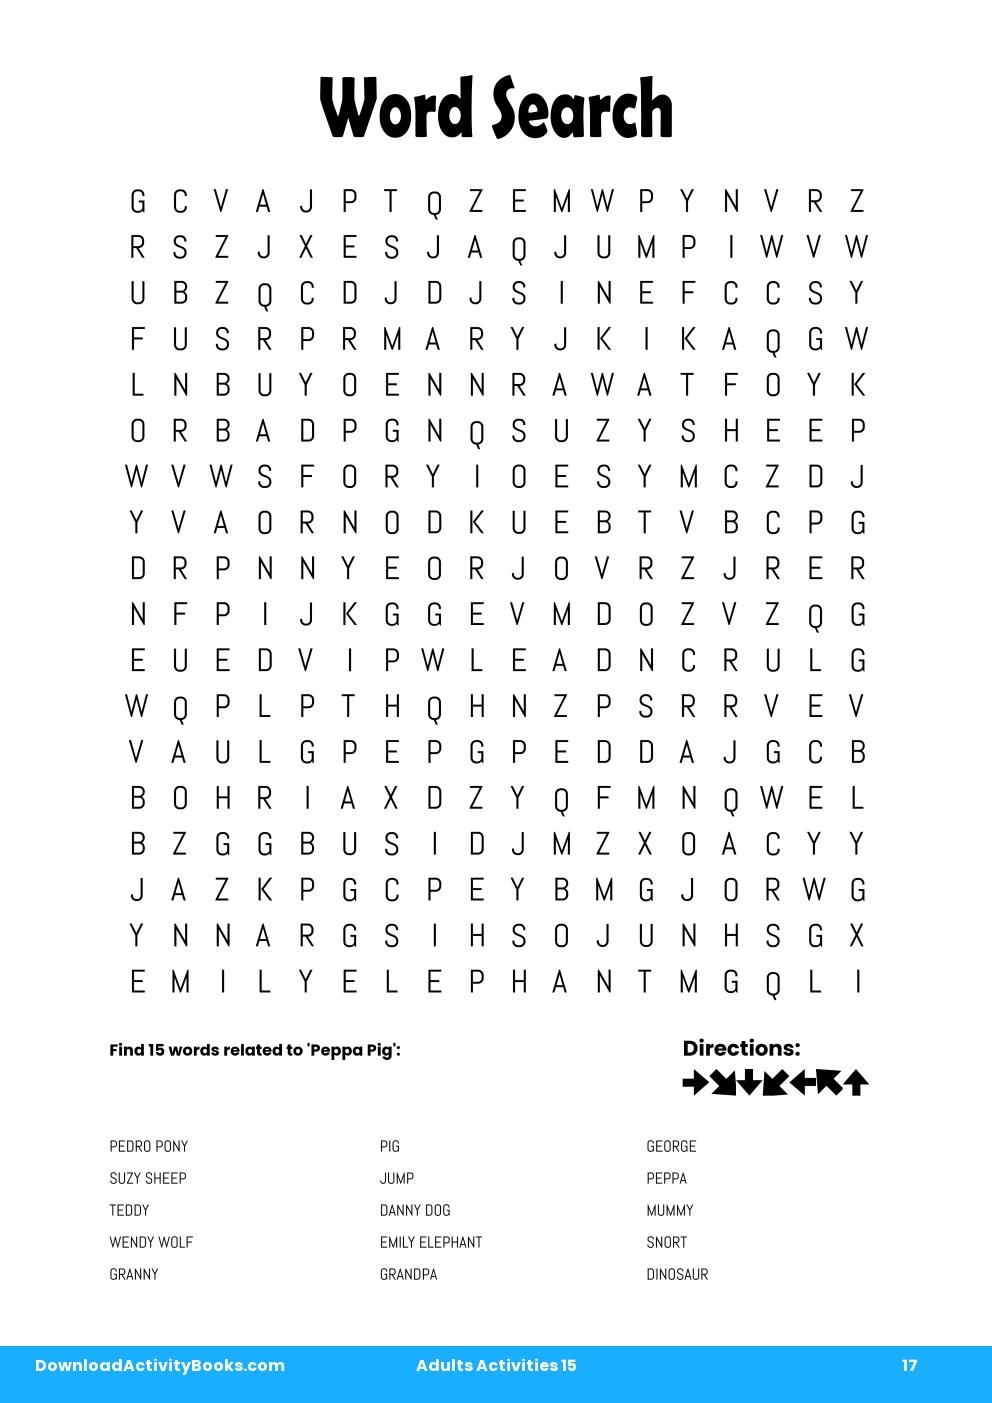 Word Search in Adults Activities 15